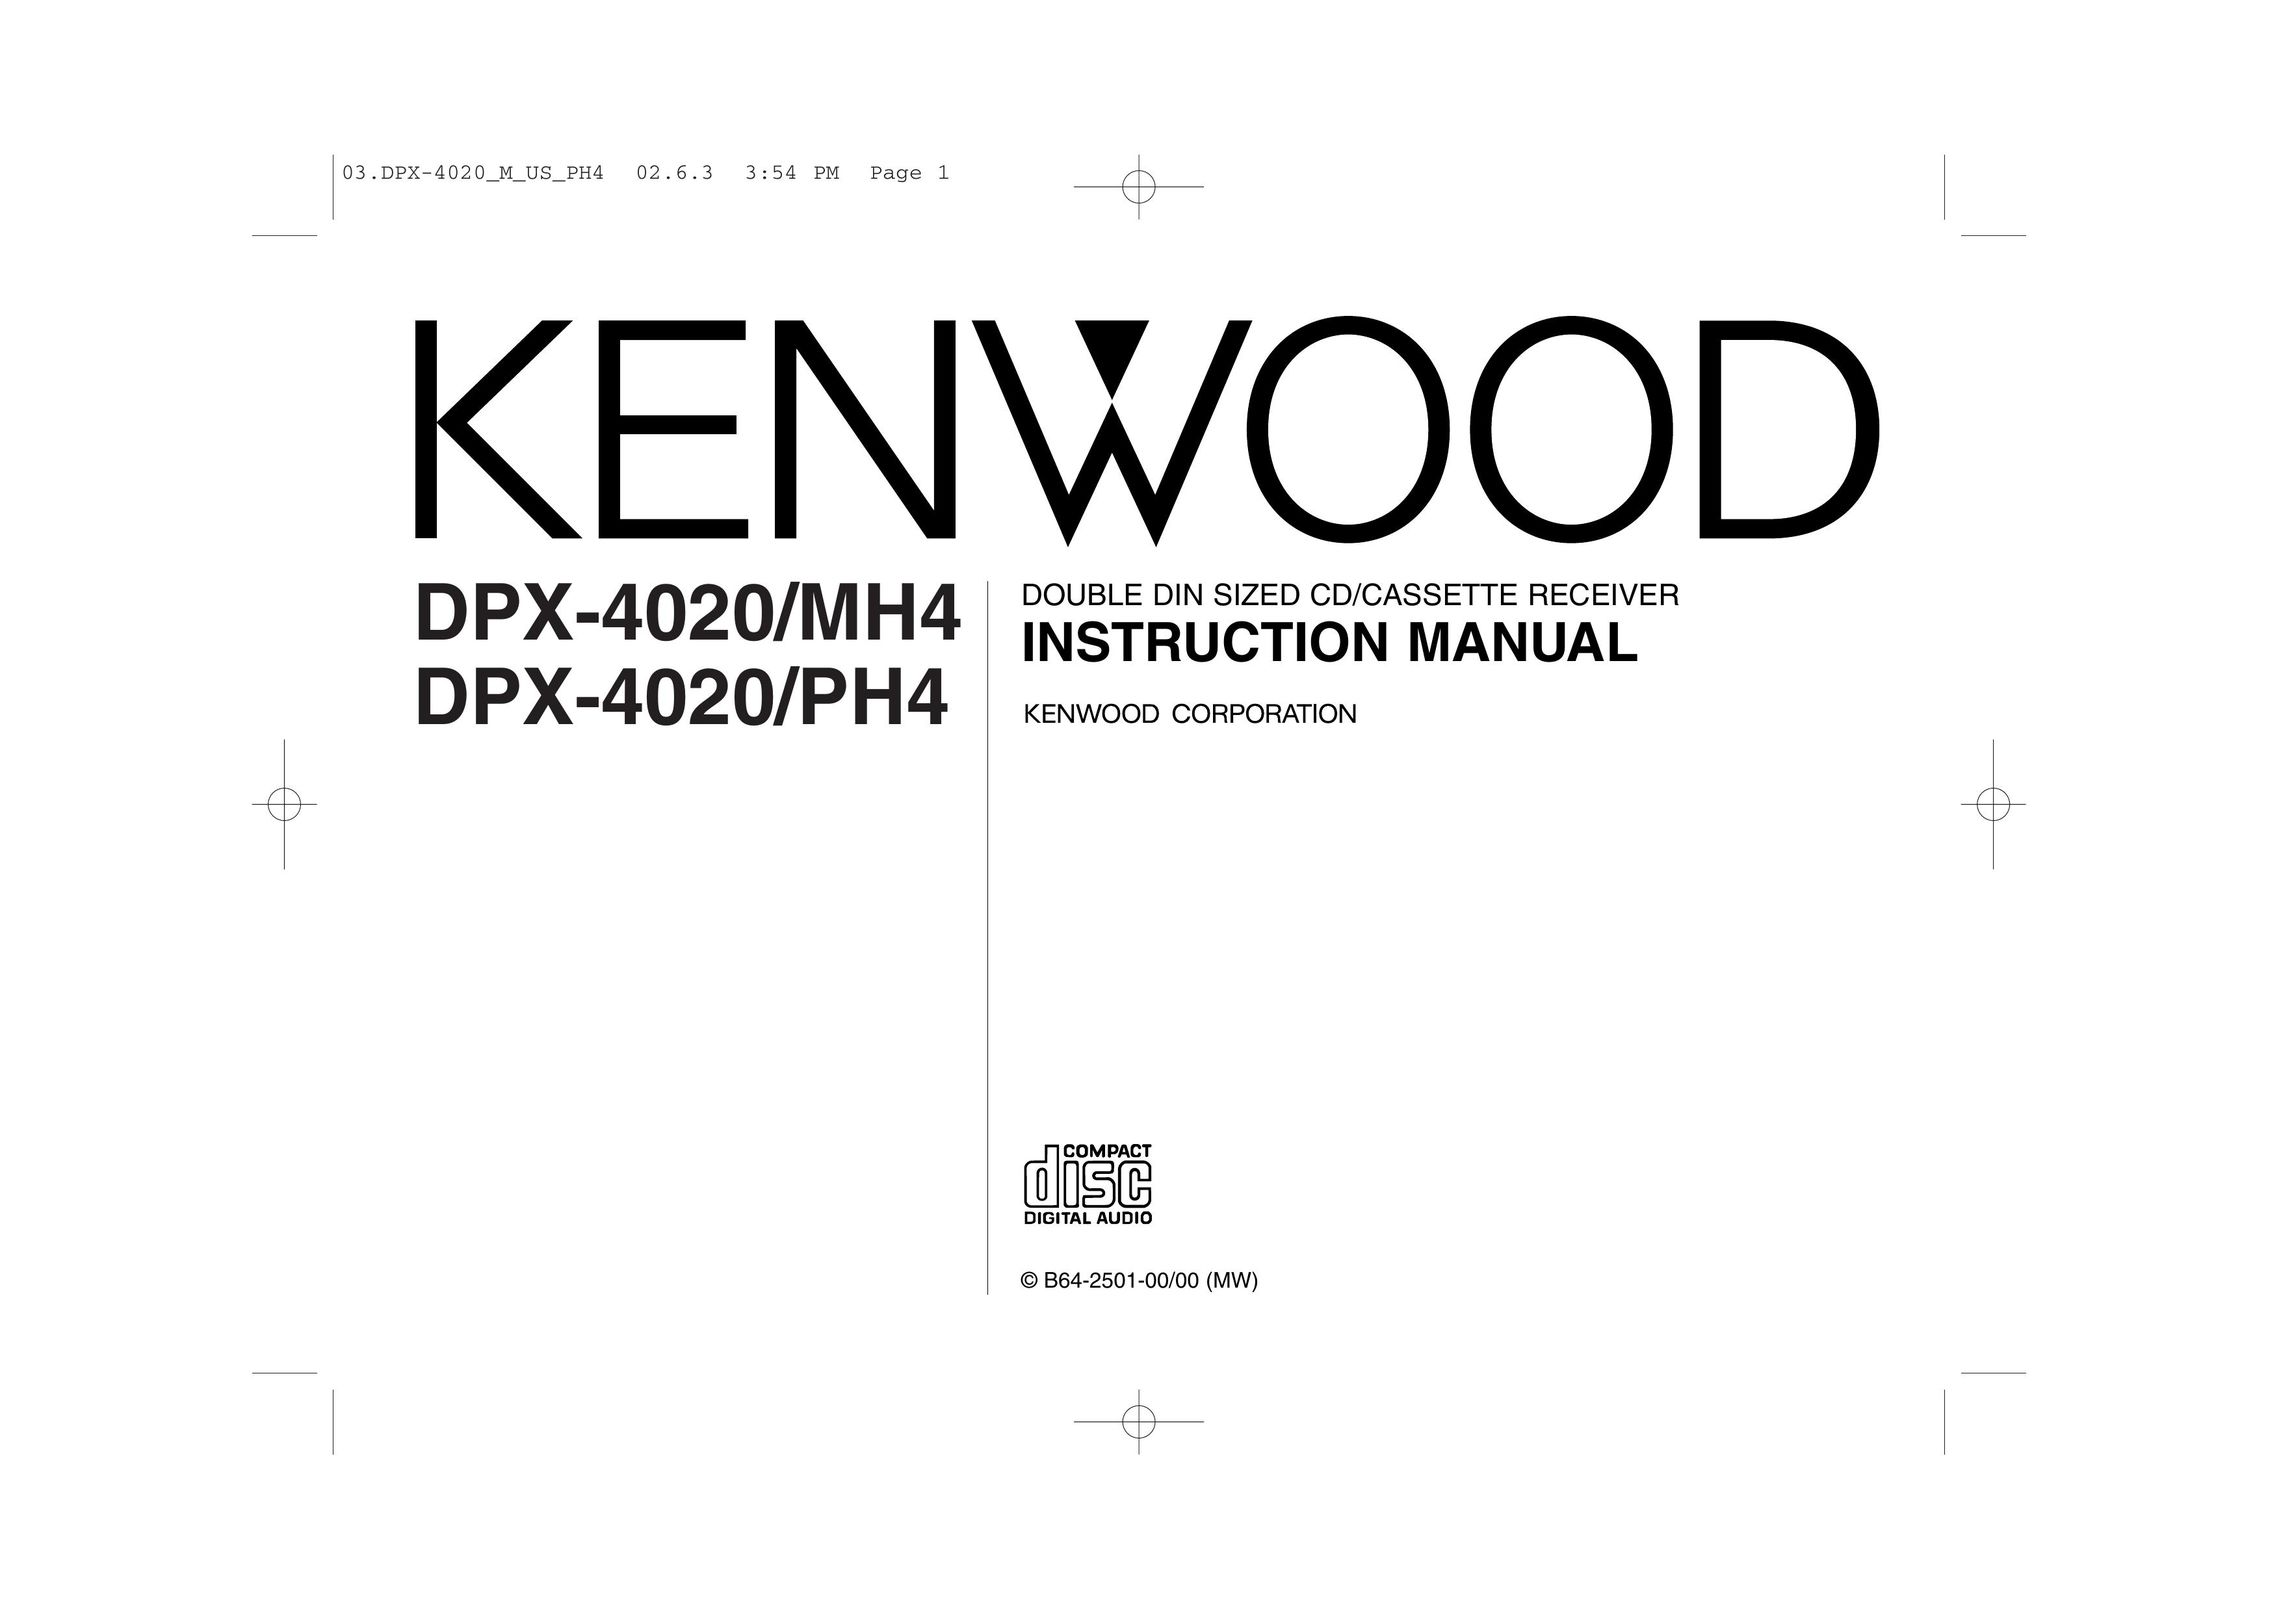 Kenwood DPX-4020PH4 Car Stereo System User Manual